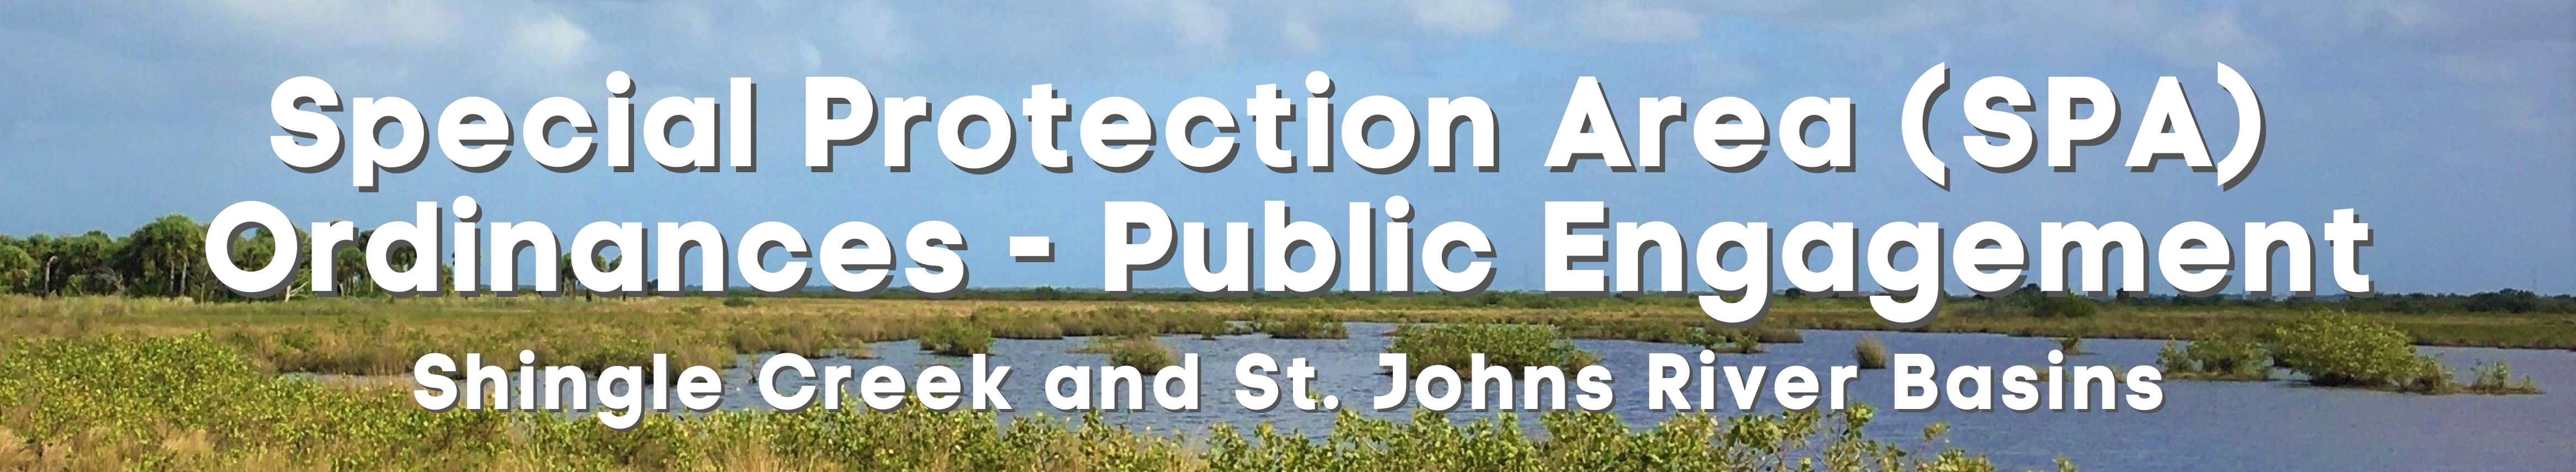 Special Protection Area (S.P.A.) Ordinances - Public Engagement Shingle Creek and St. Johns River